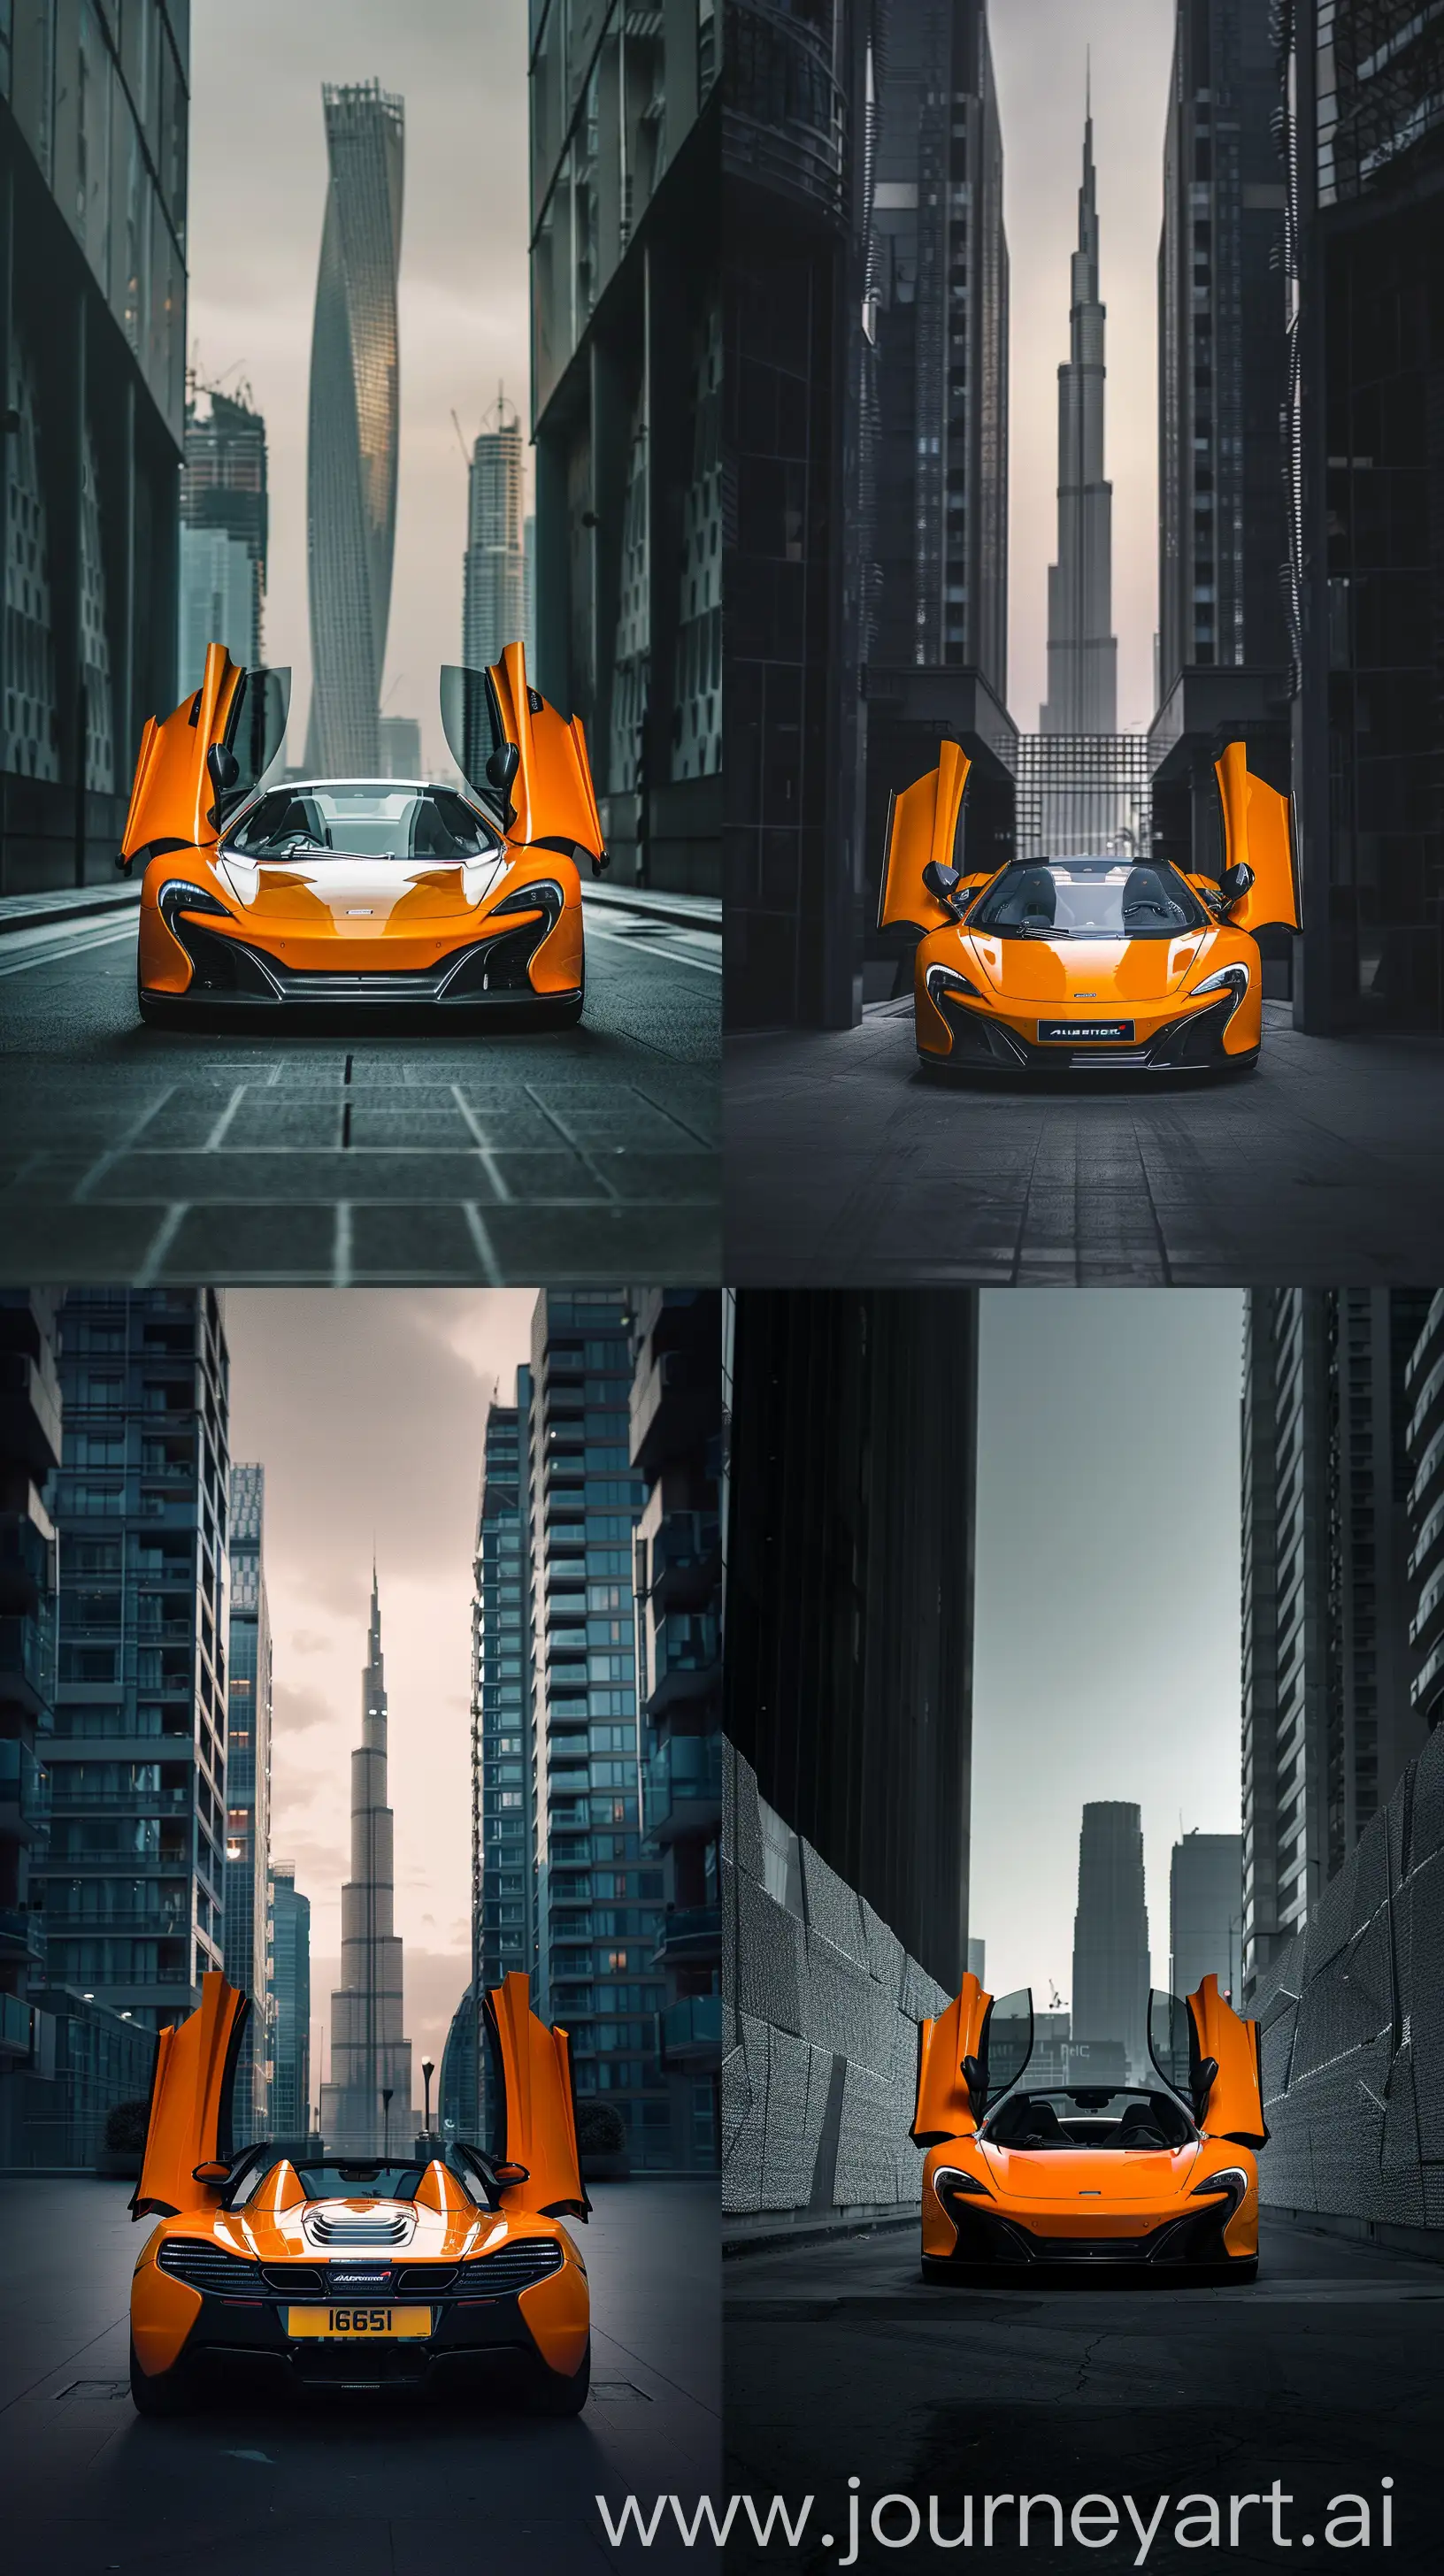 Silhouette-of-McLaren-650s-Spider-in-Bright-Orange-with-Opened-Doors-Between-Futuristic-Silver-Gray-Buildings-and-Skyscraper-Background